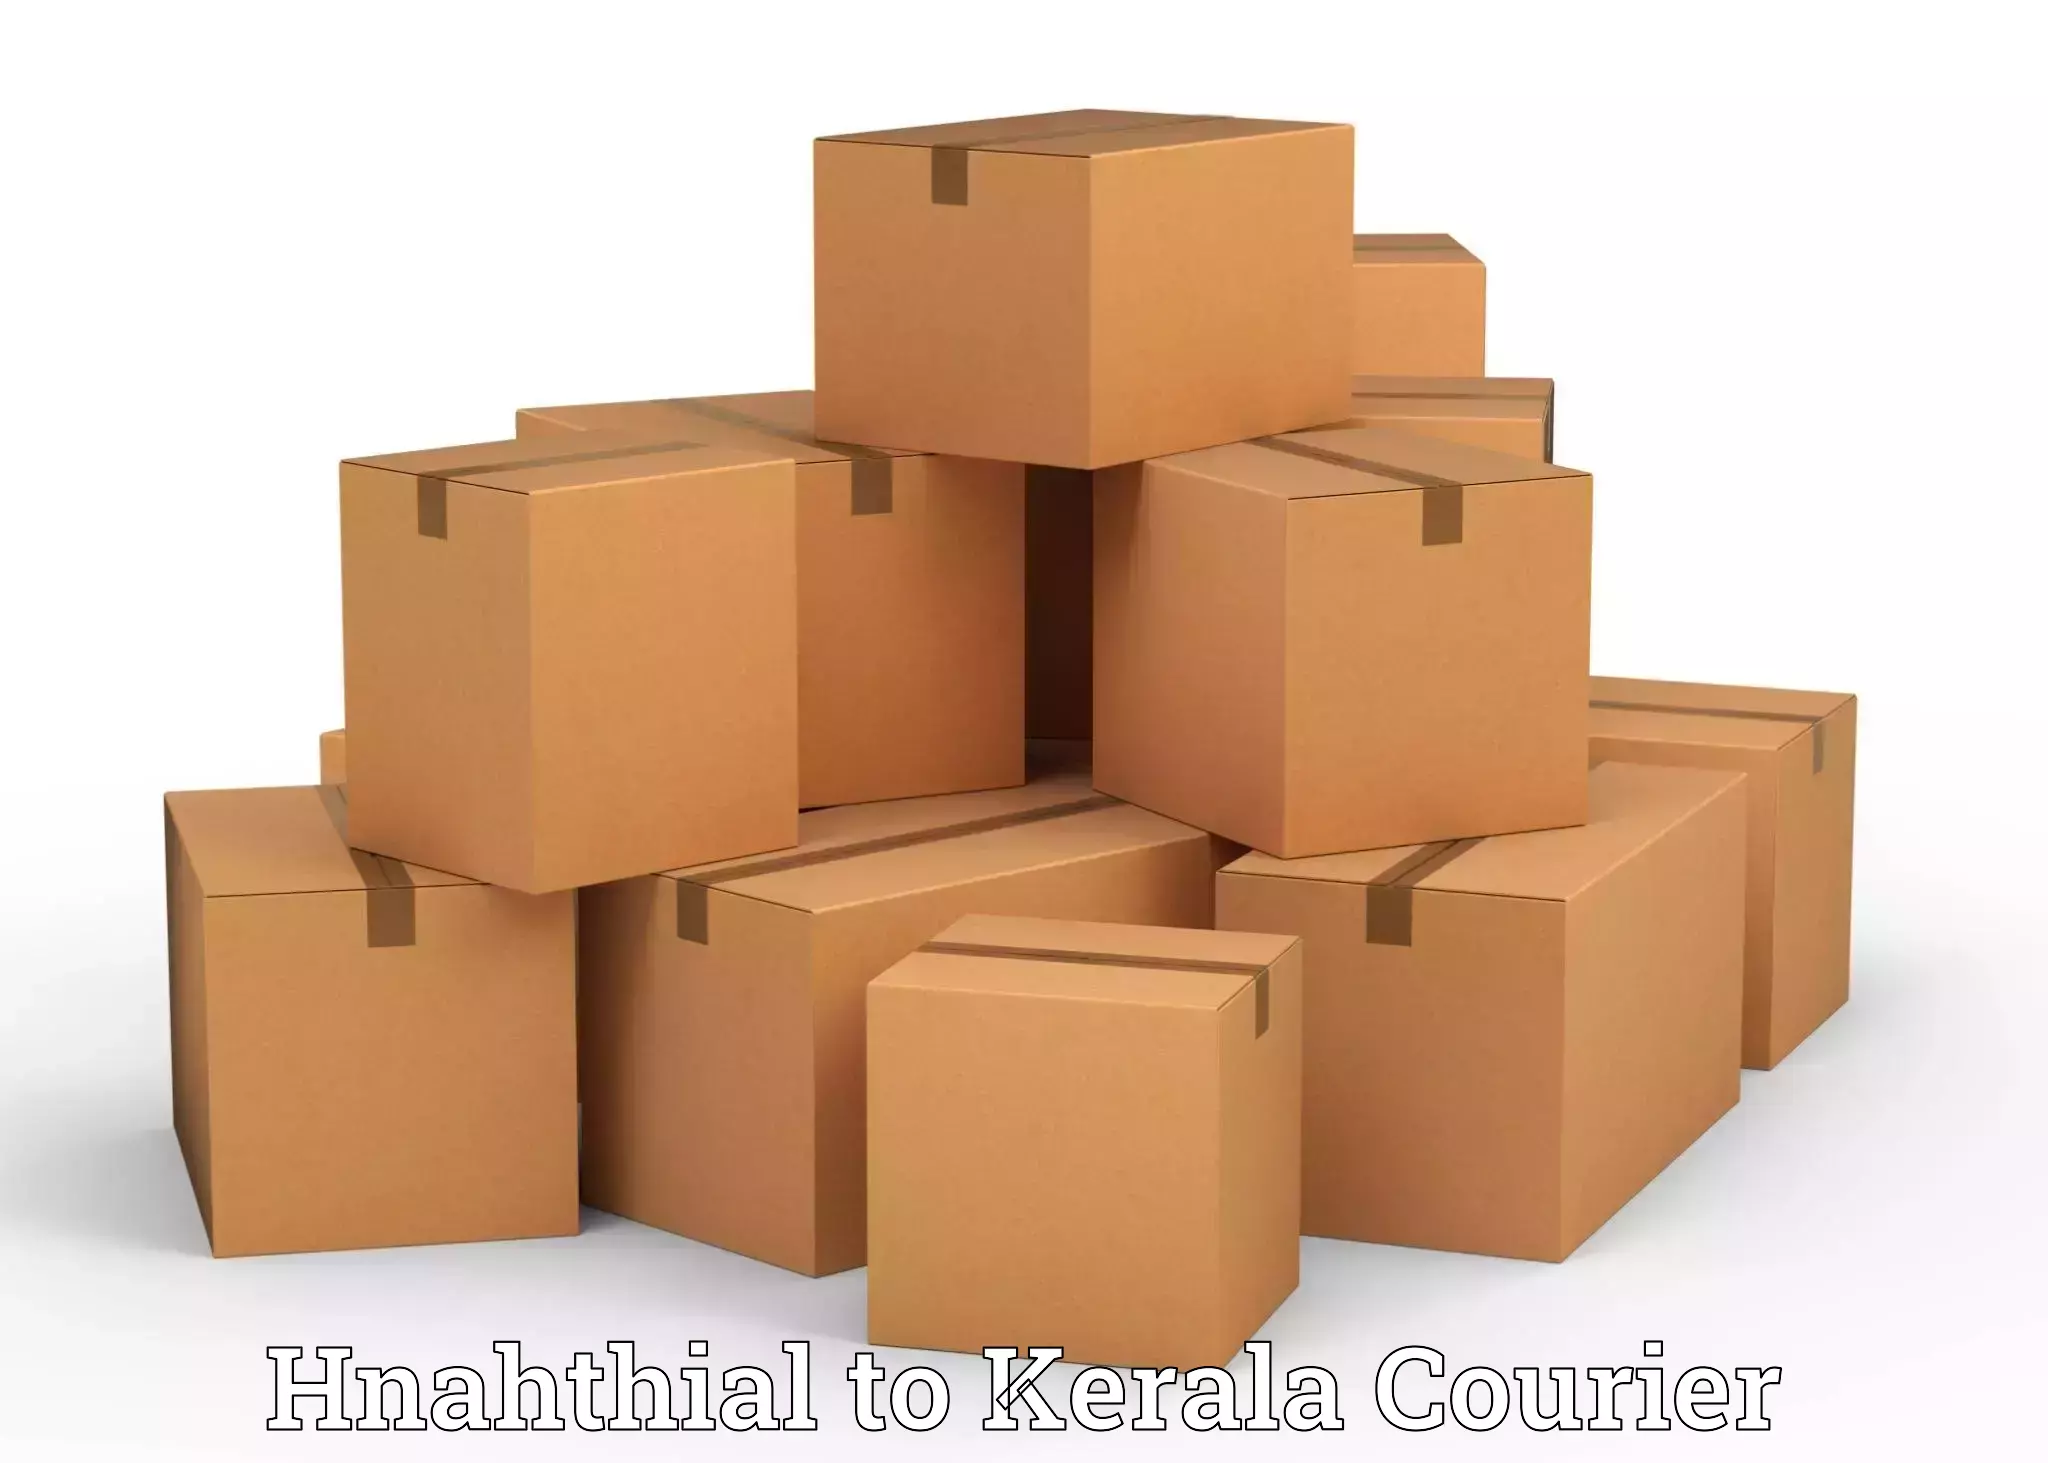 Efficient furniture transport Hnahthial to Kerala